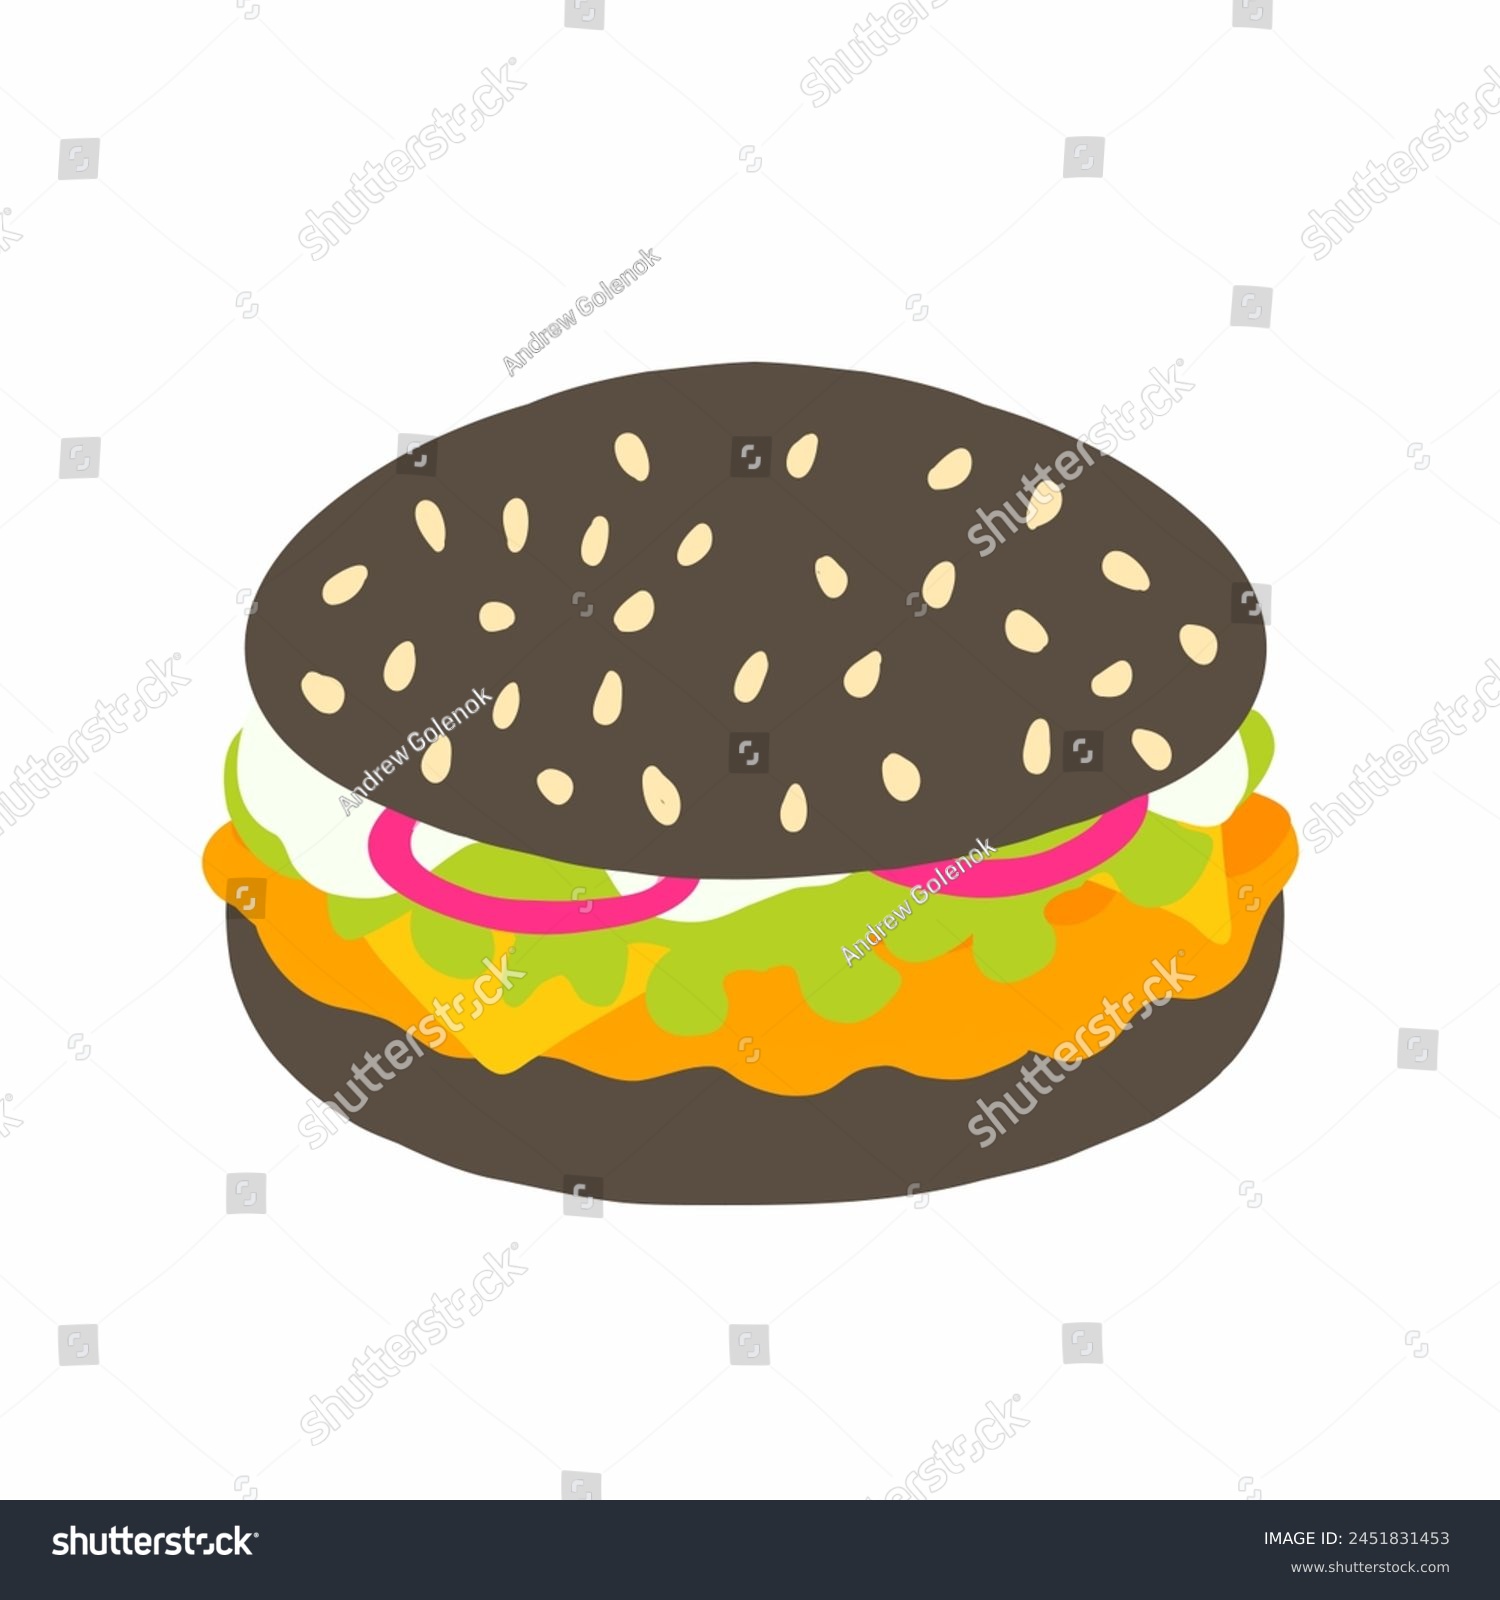 SVG of Burger with dark bun, chicken cutlet, lettuce leaf, sauce, bacon, cheese, onion. Flat icon in cartoon style. Vector illustration isolated on white background. For menu, poster, infographic, restaurant svg